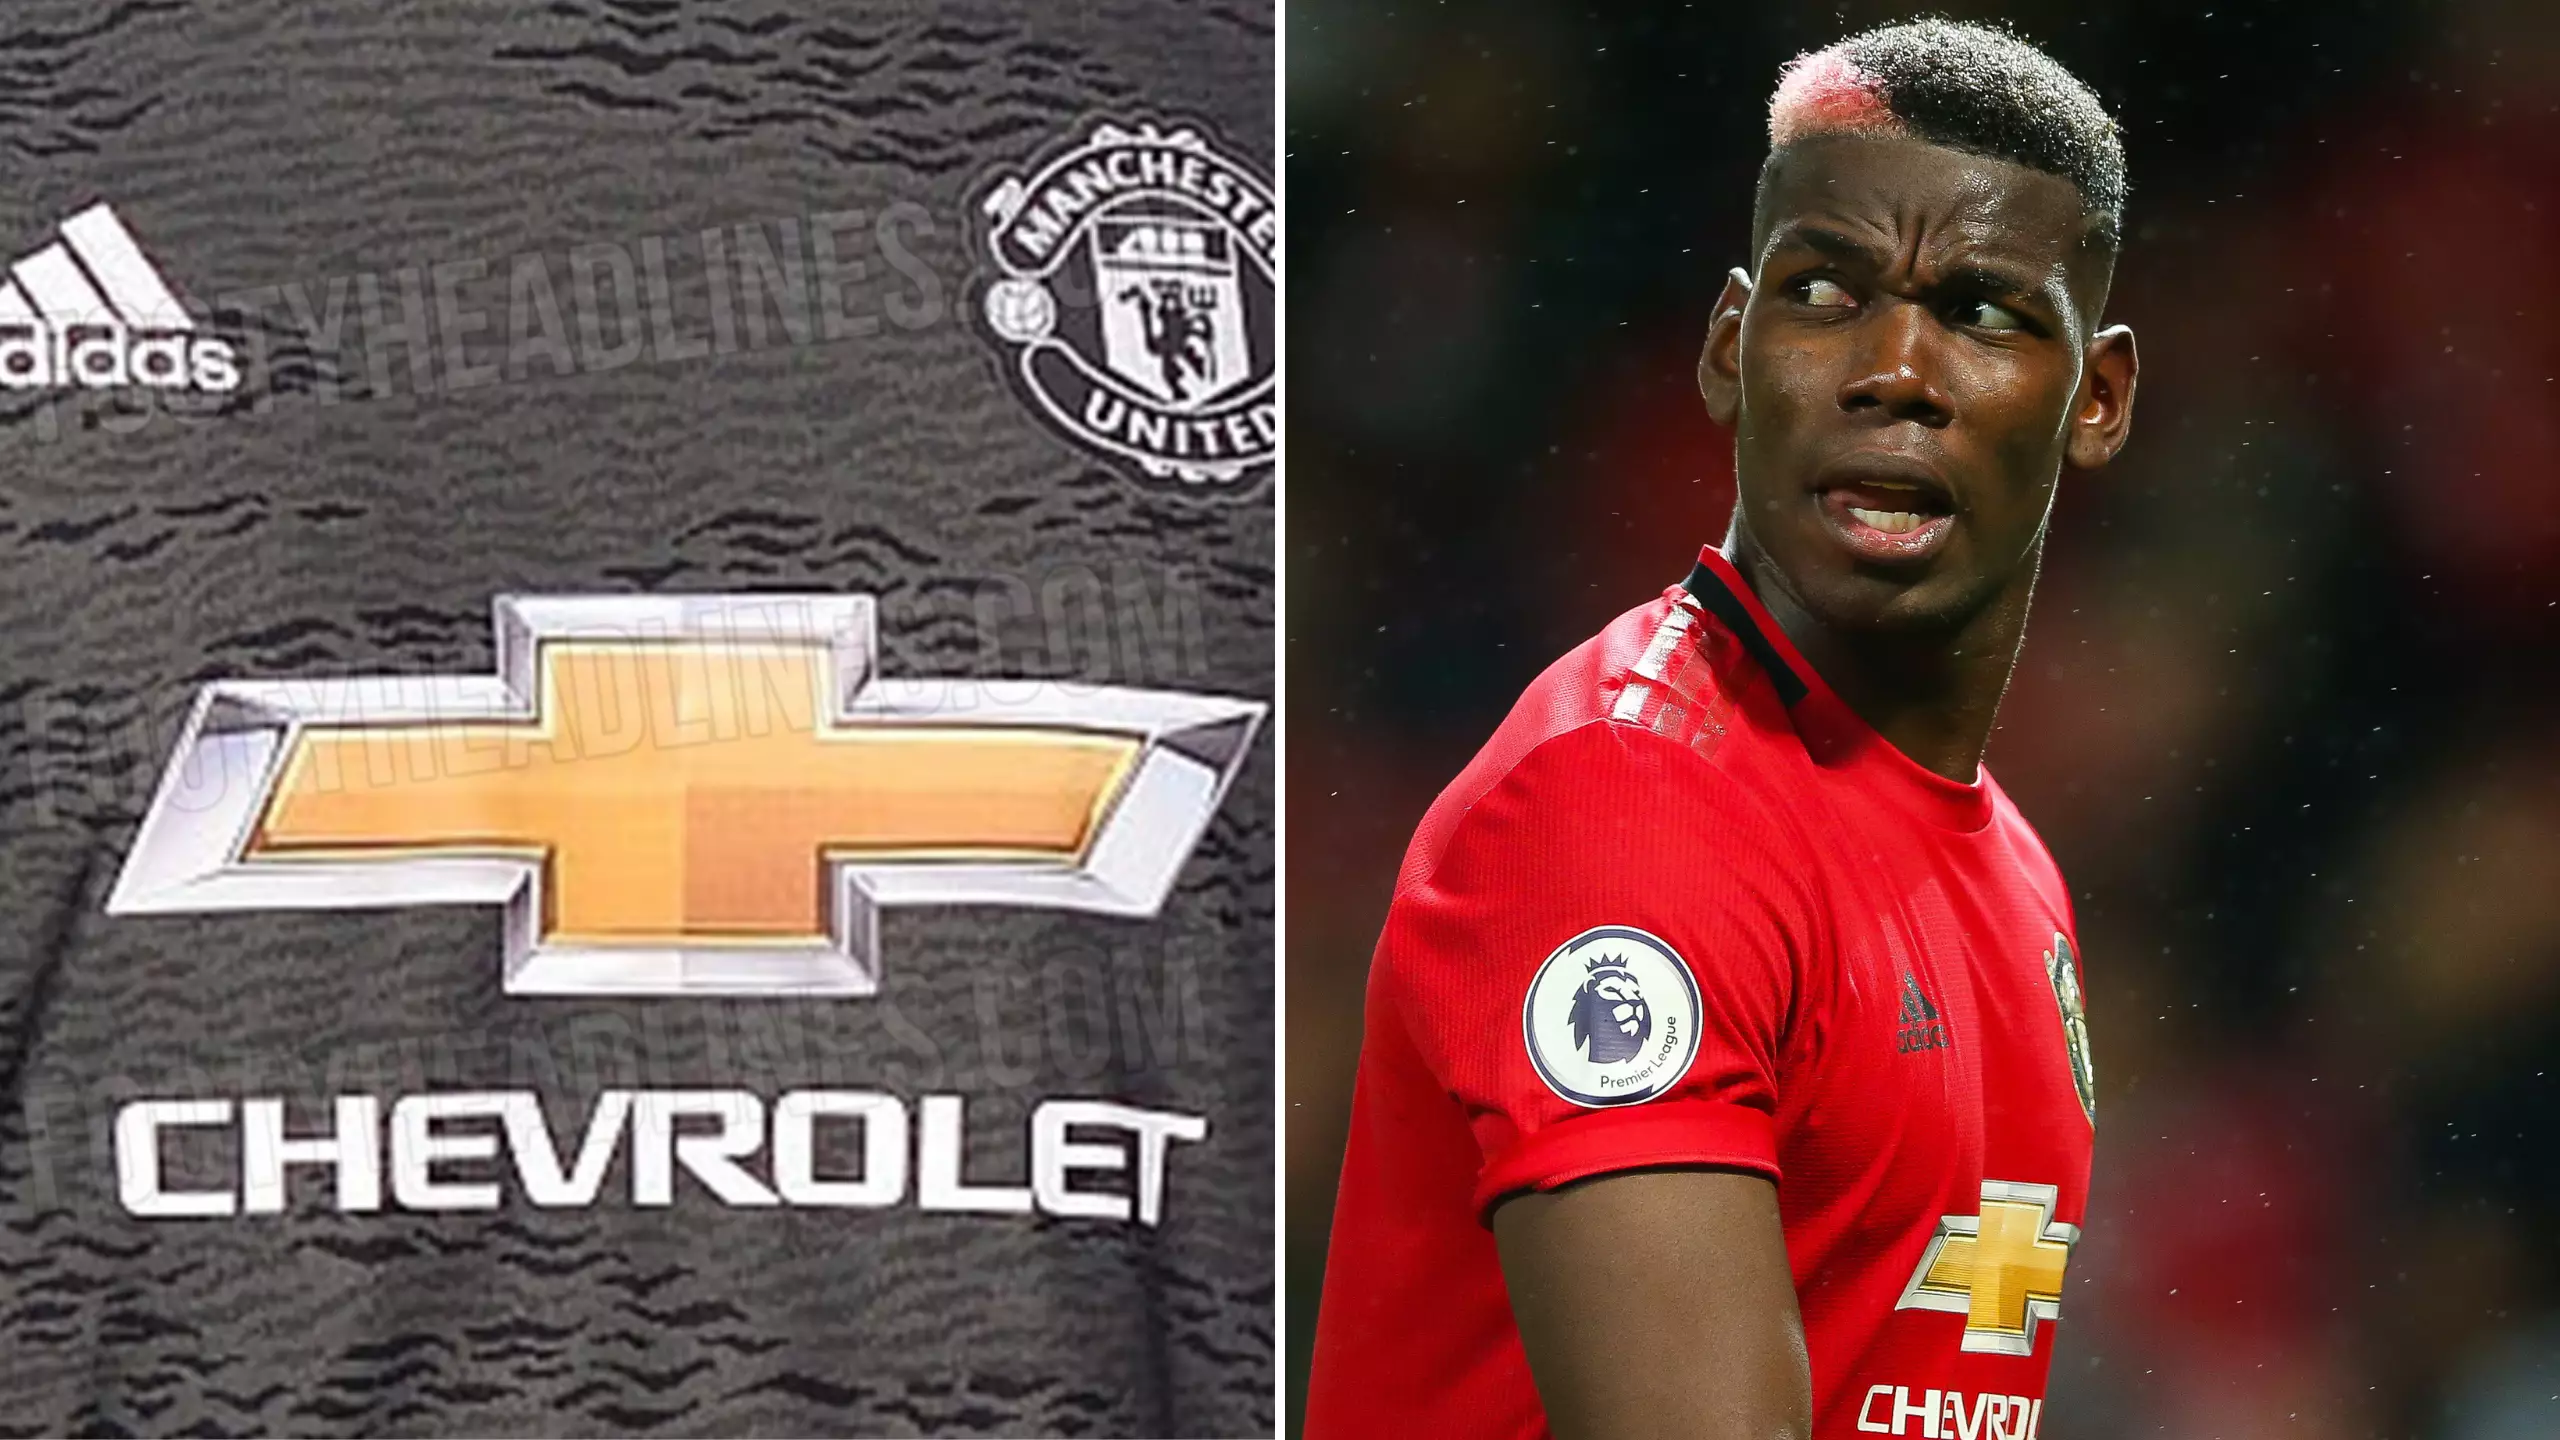 Manchester United's Away Kit For Next Season Has Been Leaked Online